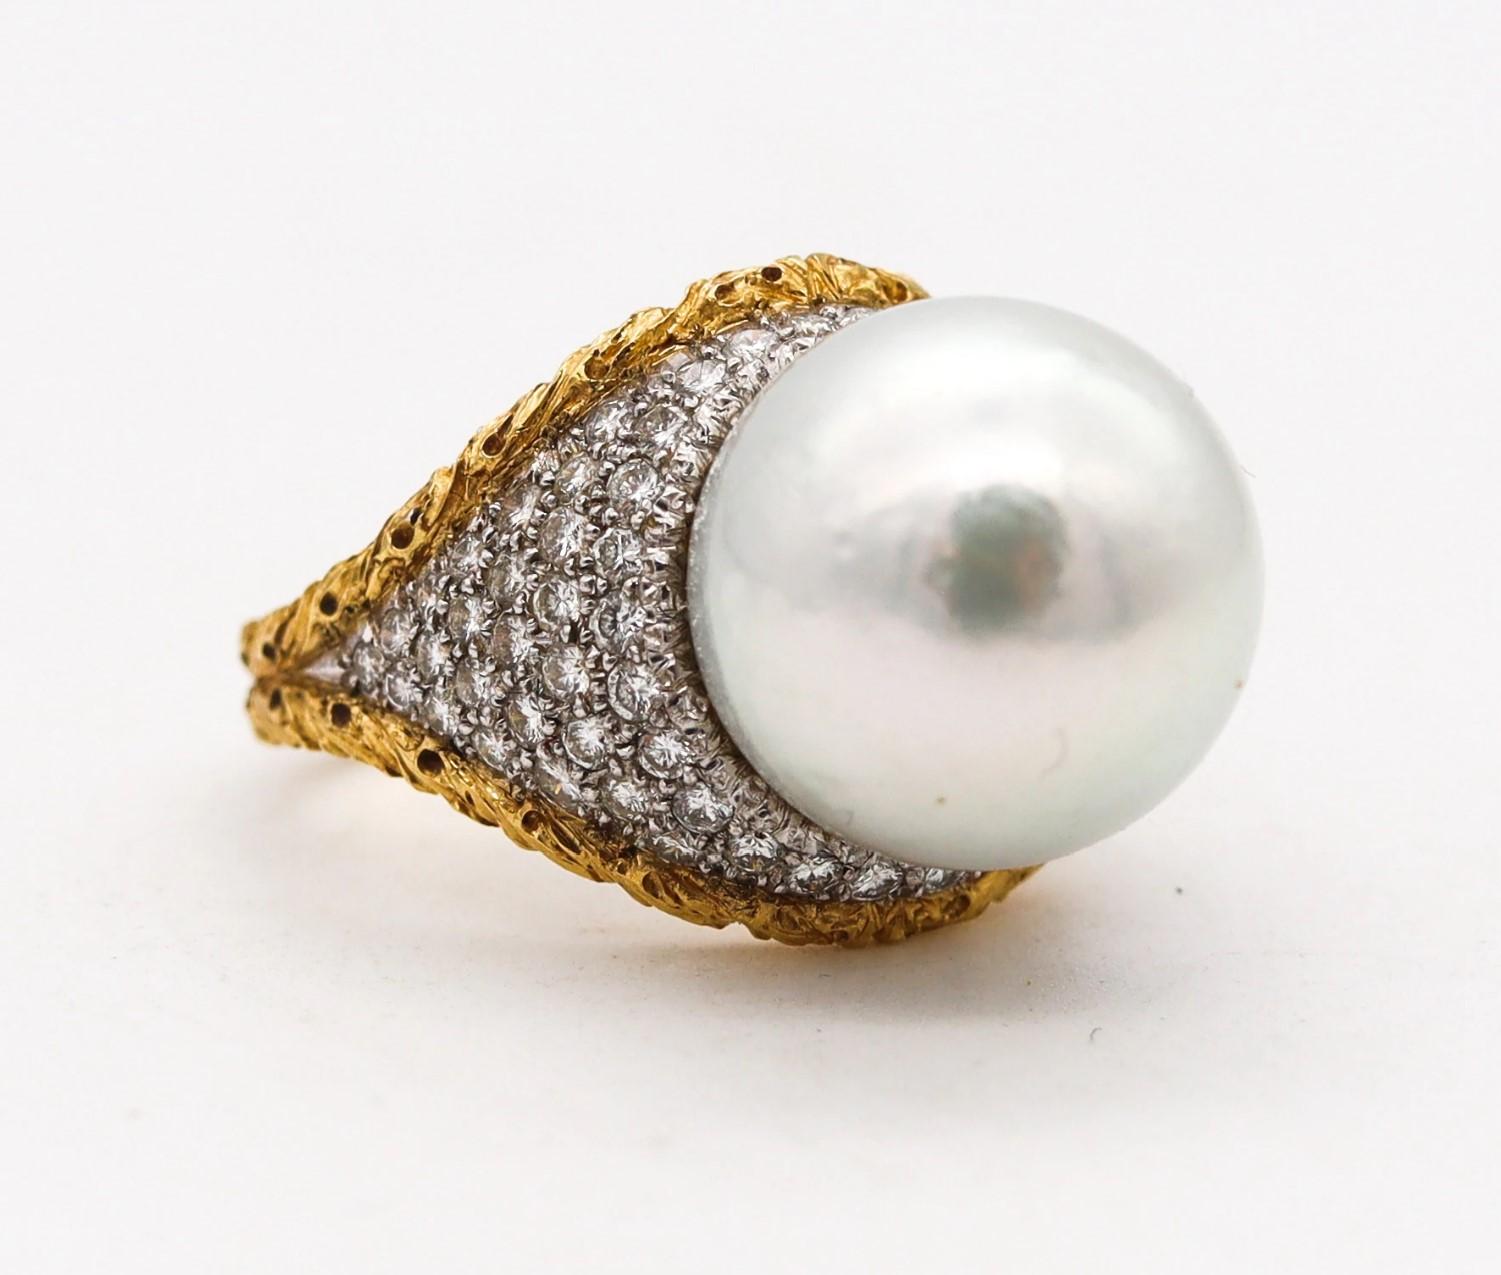 ﻿Pearl Cocktail Ring Designed by Buccellati.

Magnificent rare piece, created in Milano Italy by the luxury house of Buccellati. This gorgeous cocktail ring has been carefully crafted with baroque patterns in solid yellow gold of 18 karats and white